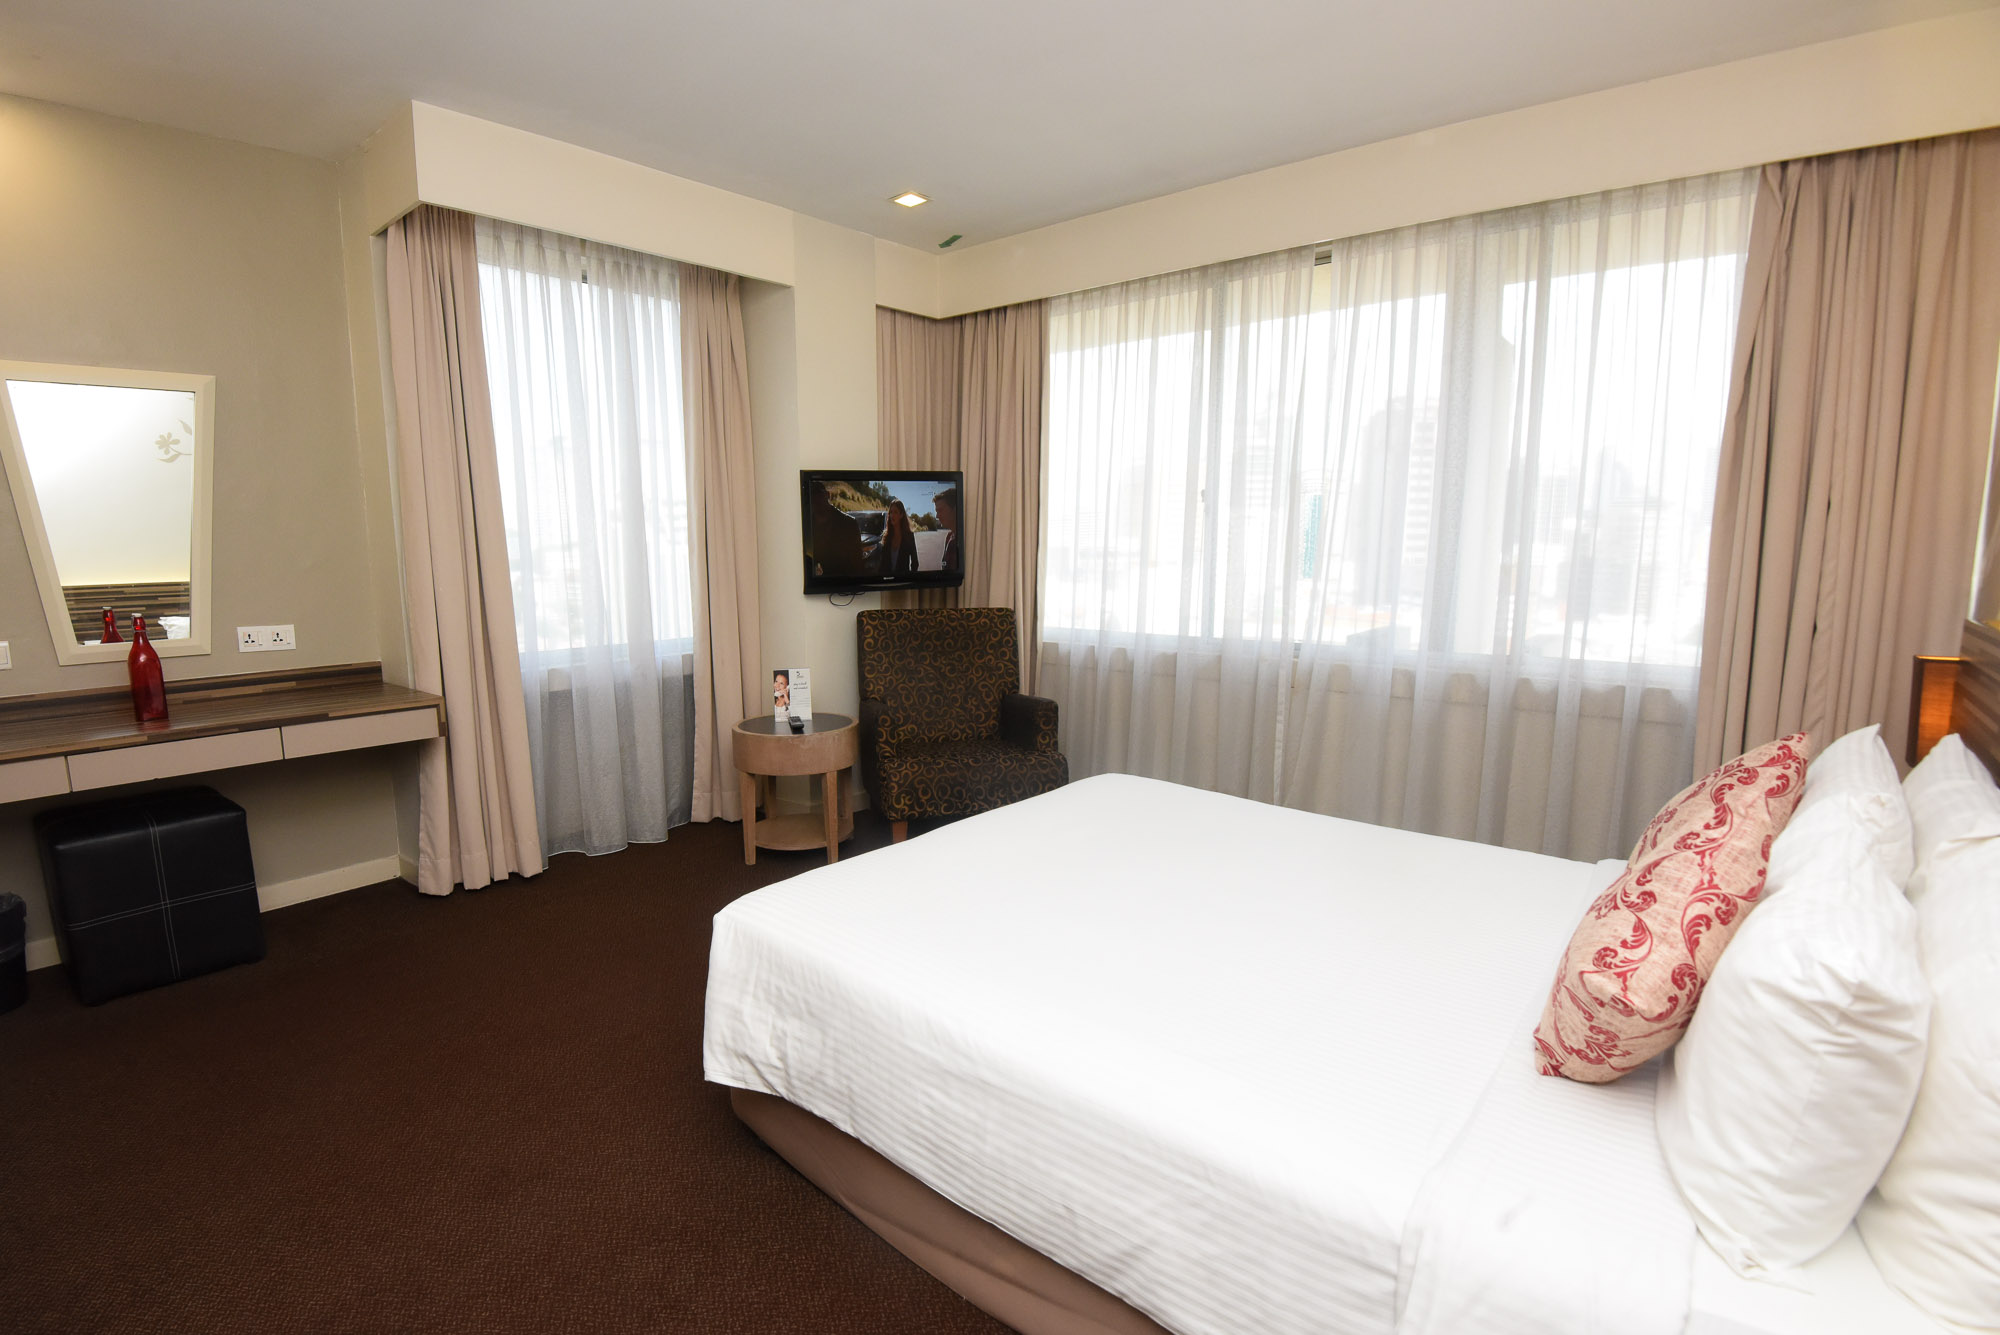 The Deluxe Queen room is perfectly fitted with a comfortable queen bed for couples and travelers alike. The room is equipped with air-conditioning, shower facilities, complimentary WiFi, in-room safe and many others. Dental kit, hair dryer and ironing facilities are available upon request.